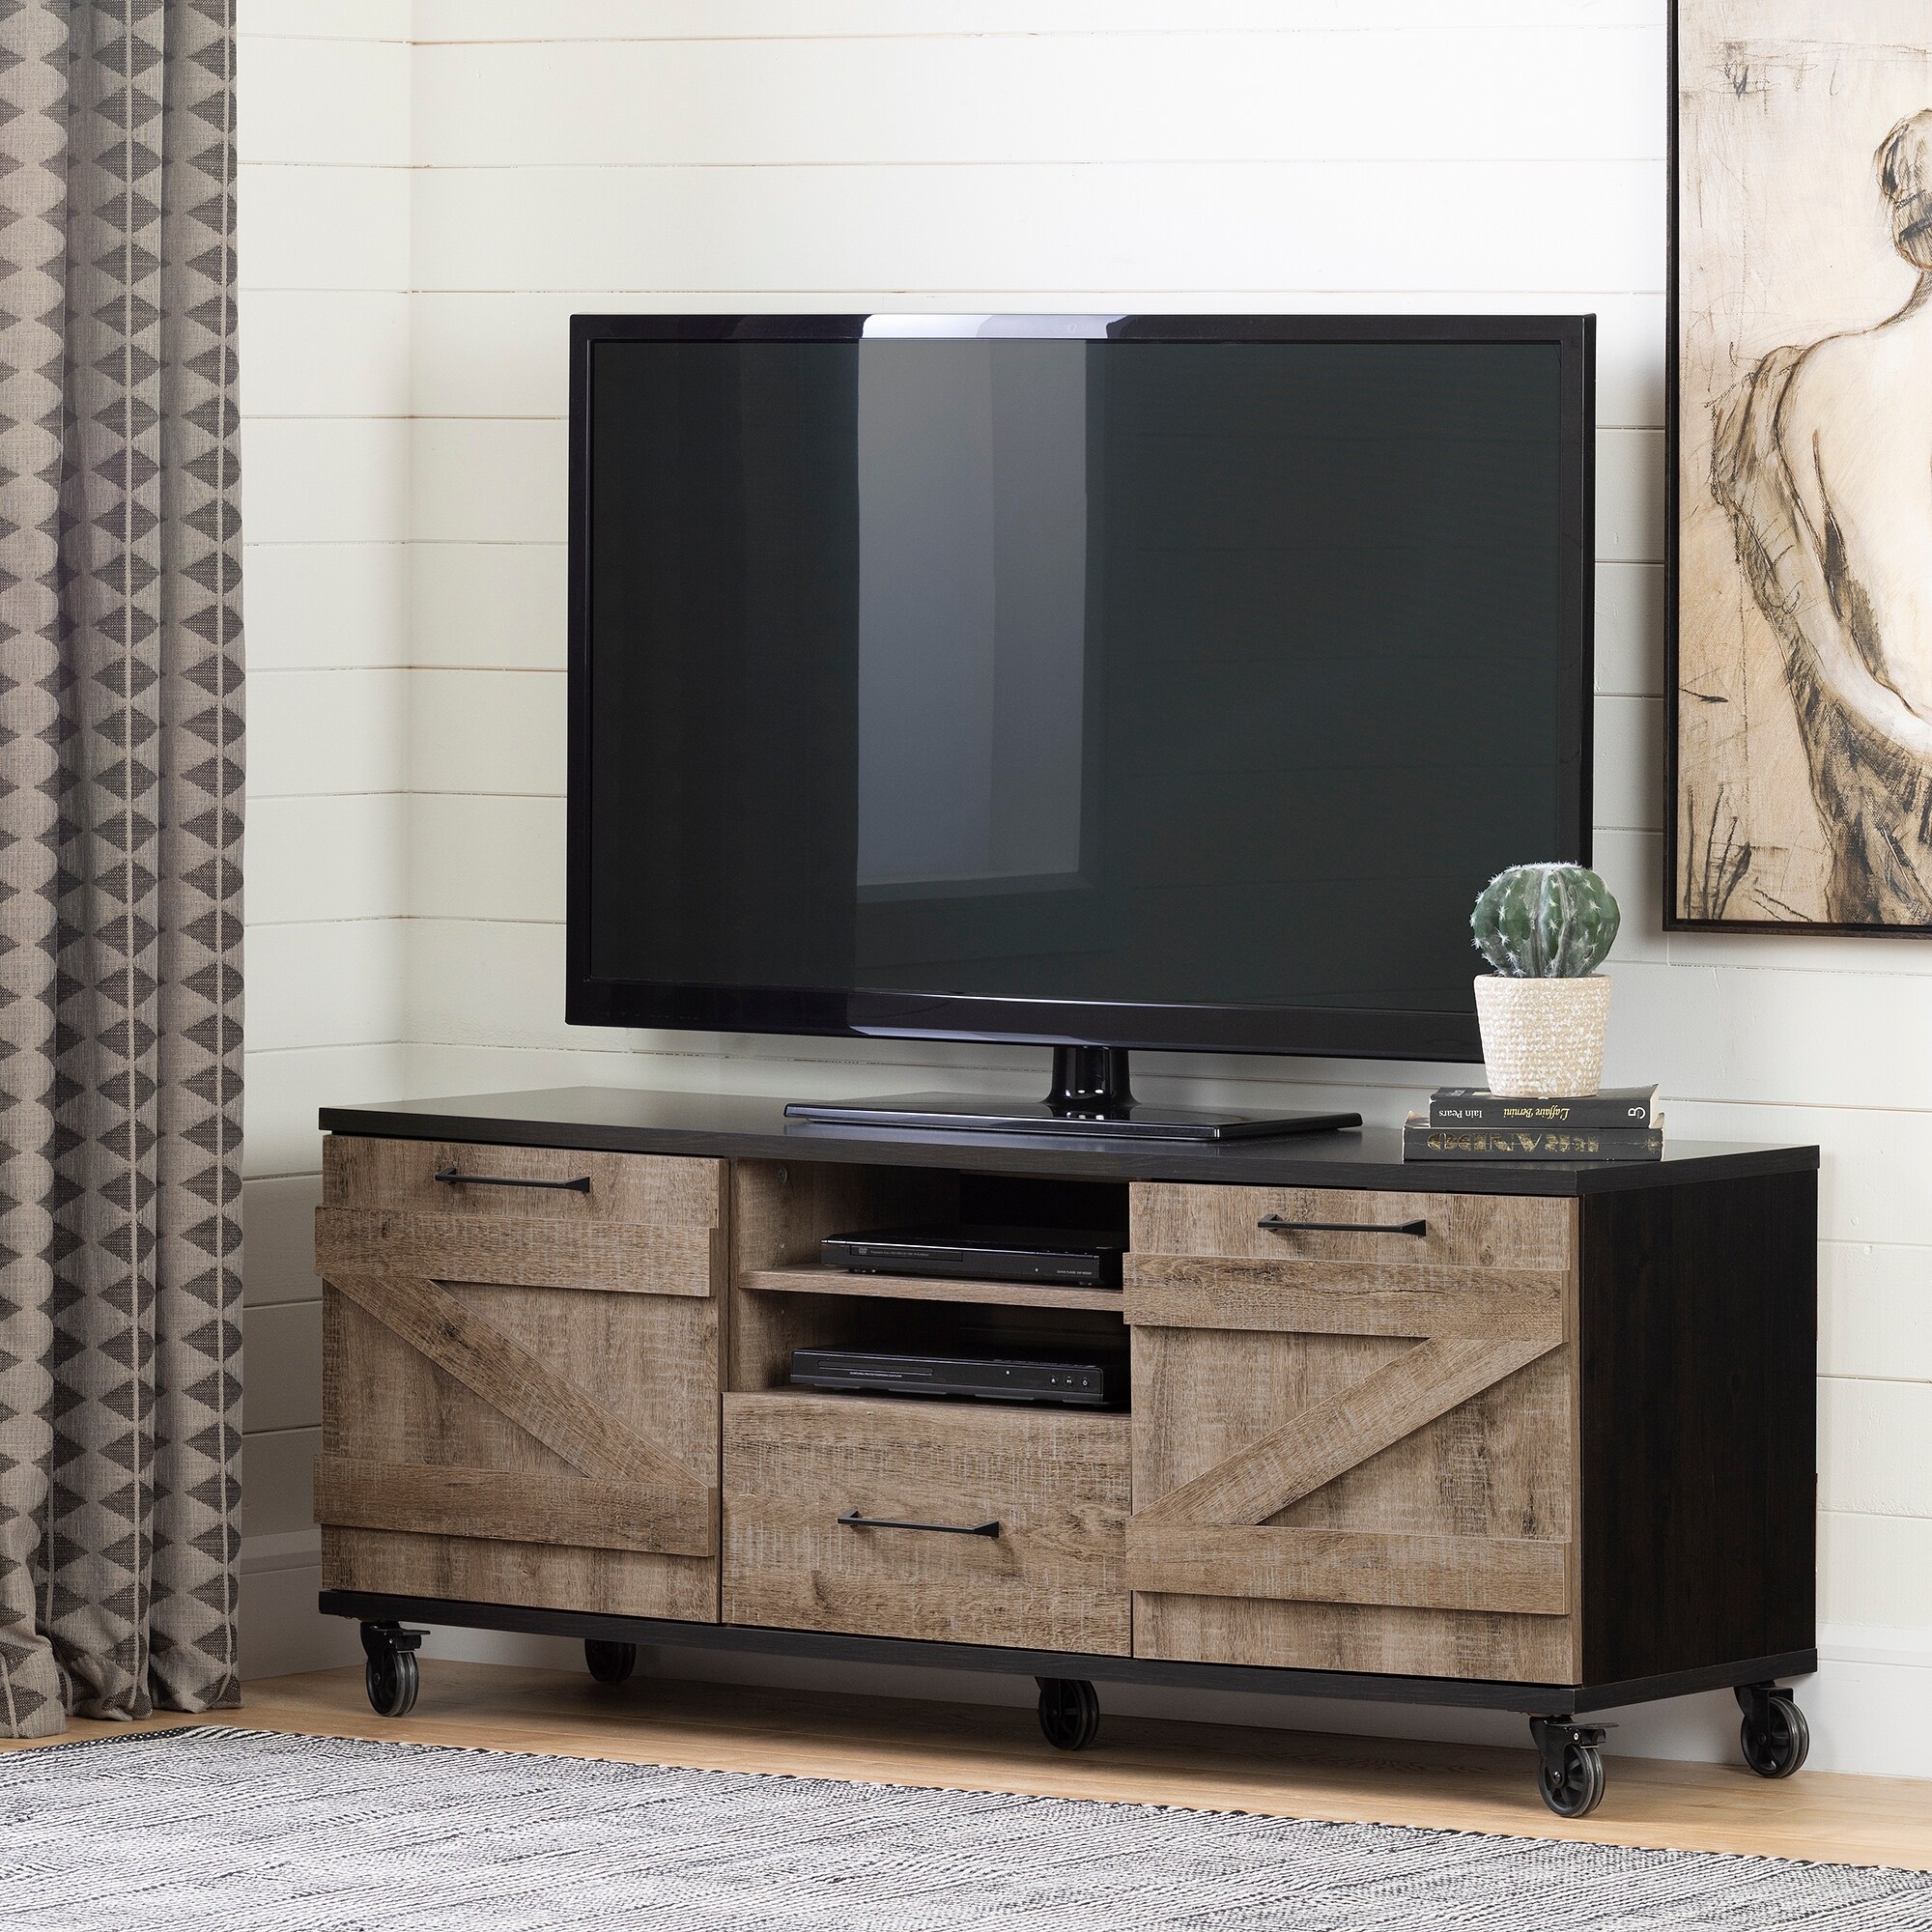 Valet Modern Industrial Living Room TV Stand With Storage On